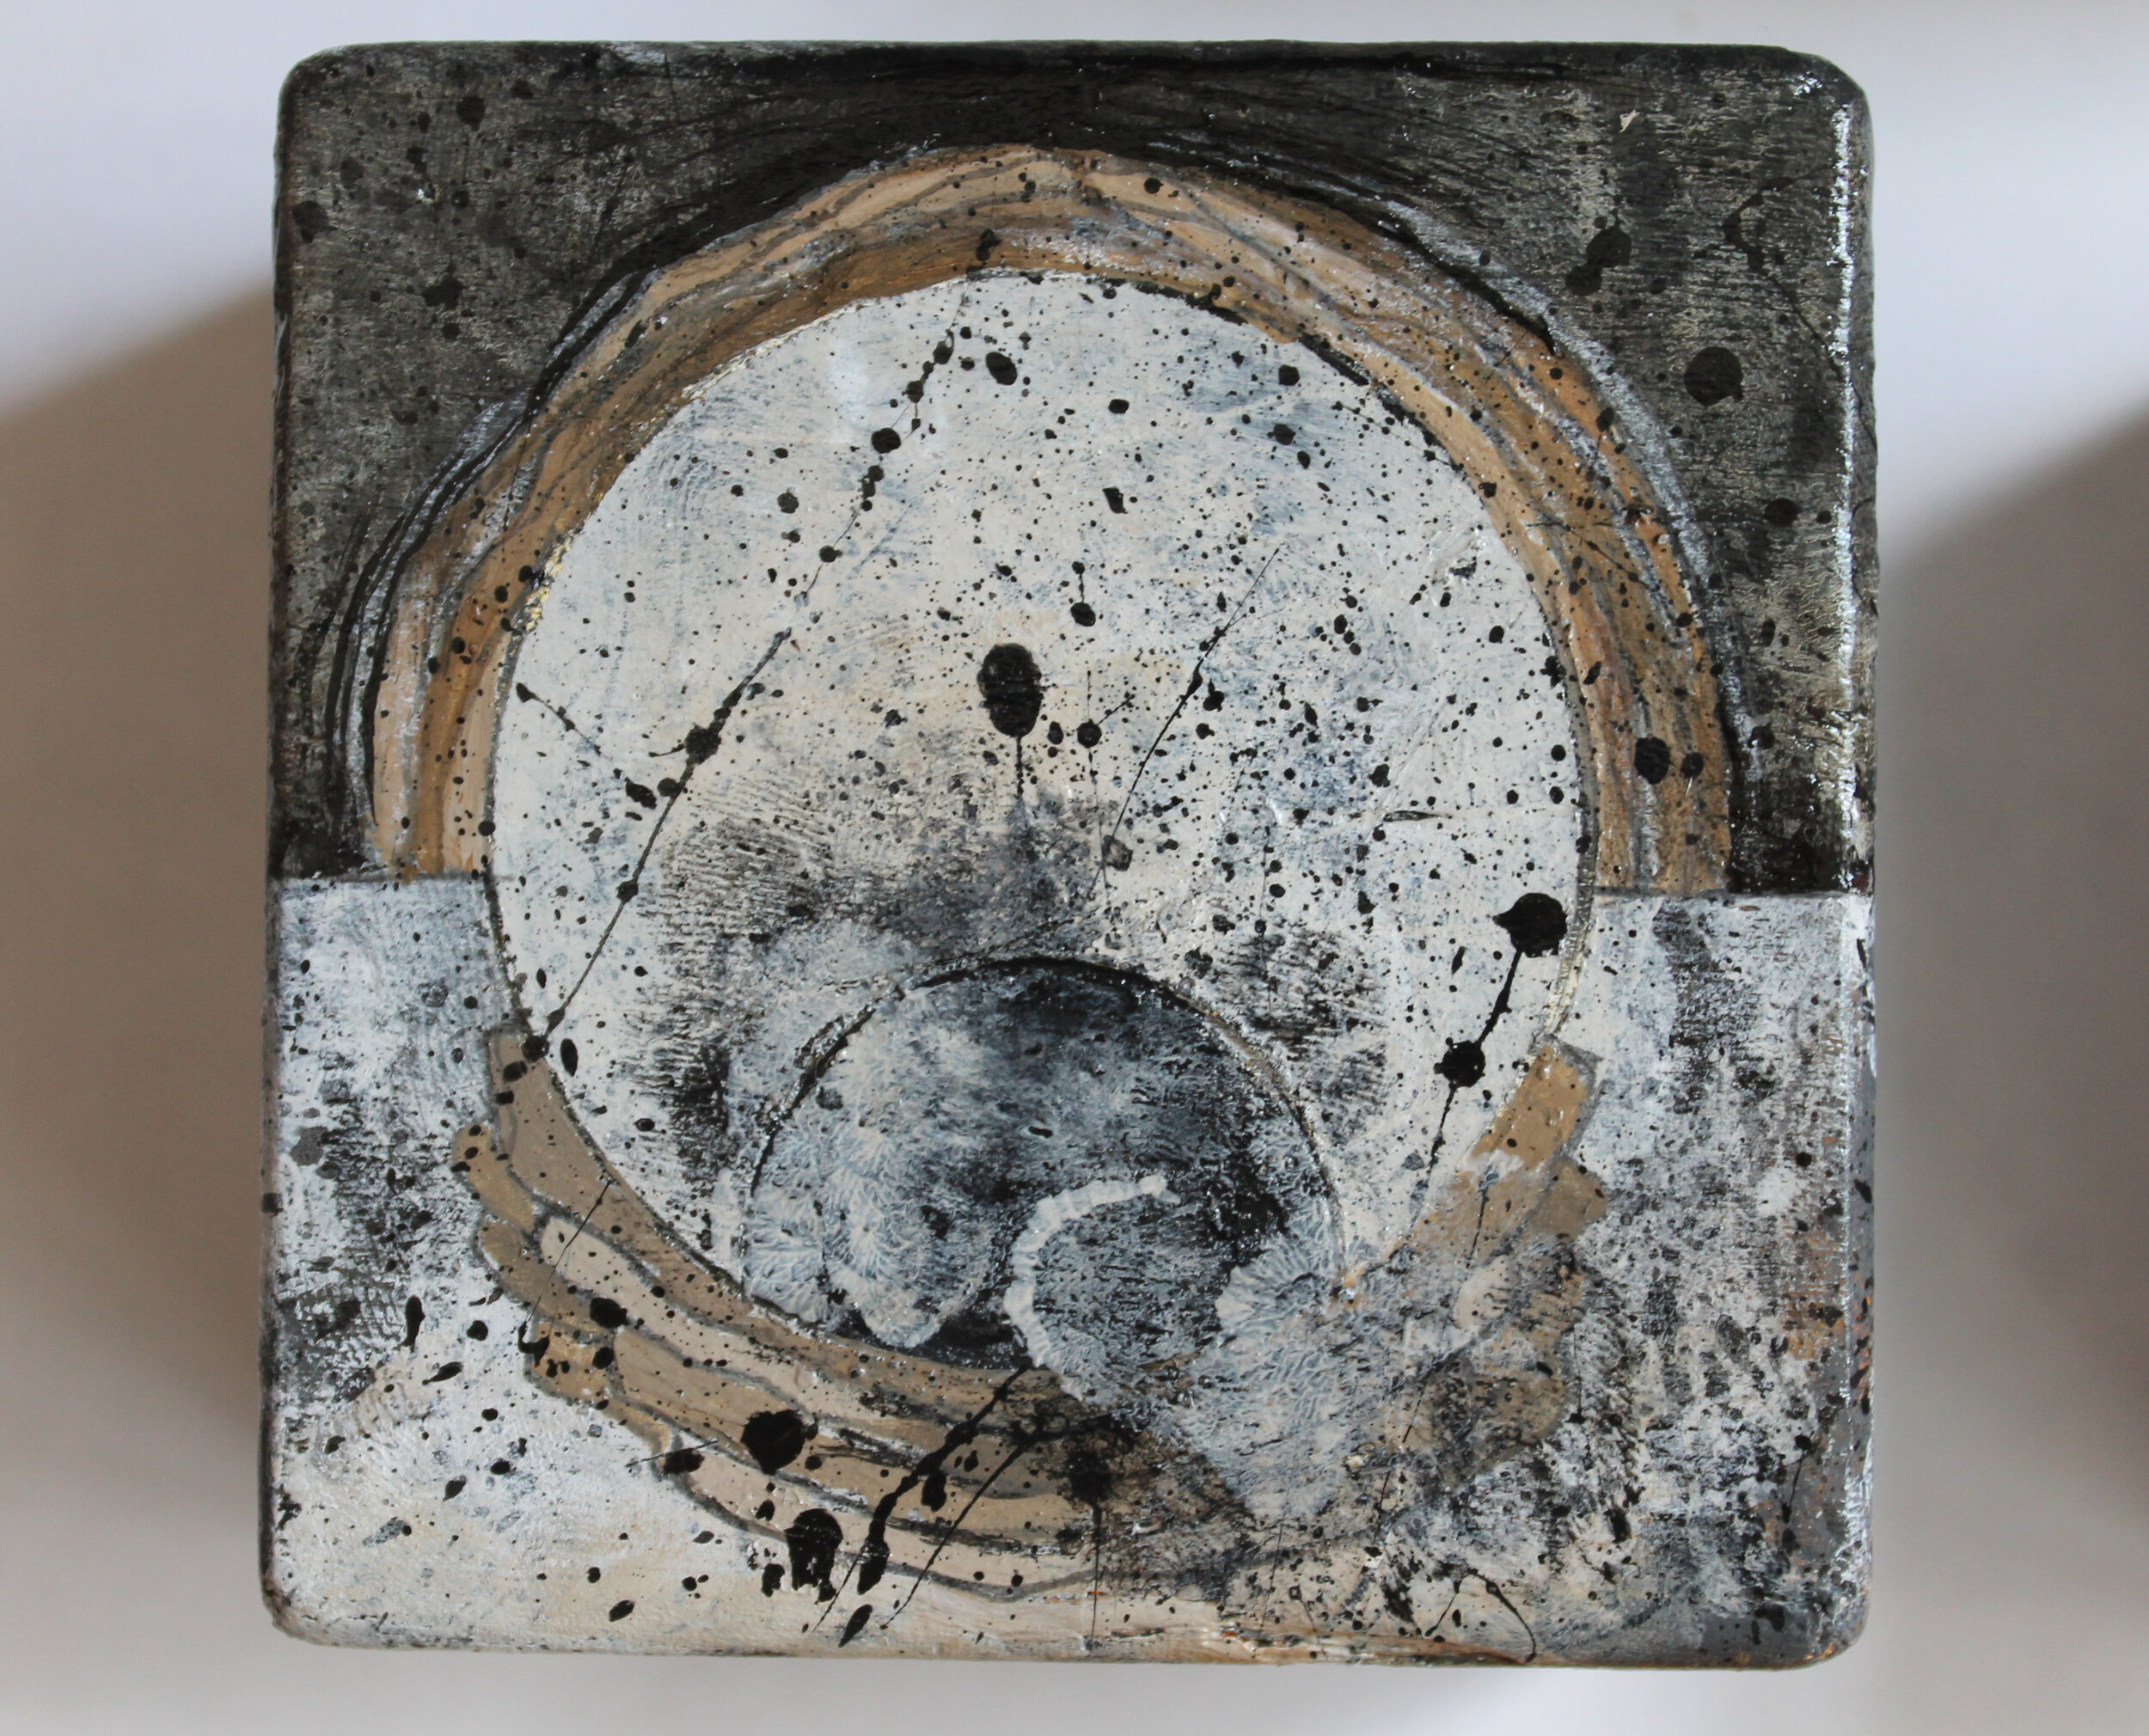  3 x 3 Inches  Woodblock  Acrylic, Ink, Graphite, Spray Paint  Summer, 2020 